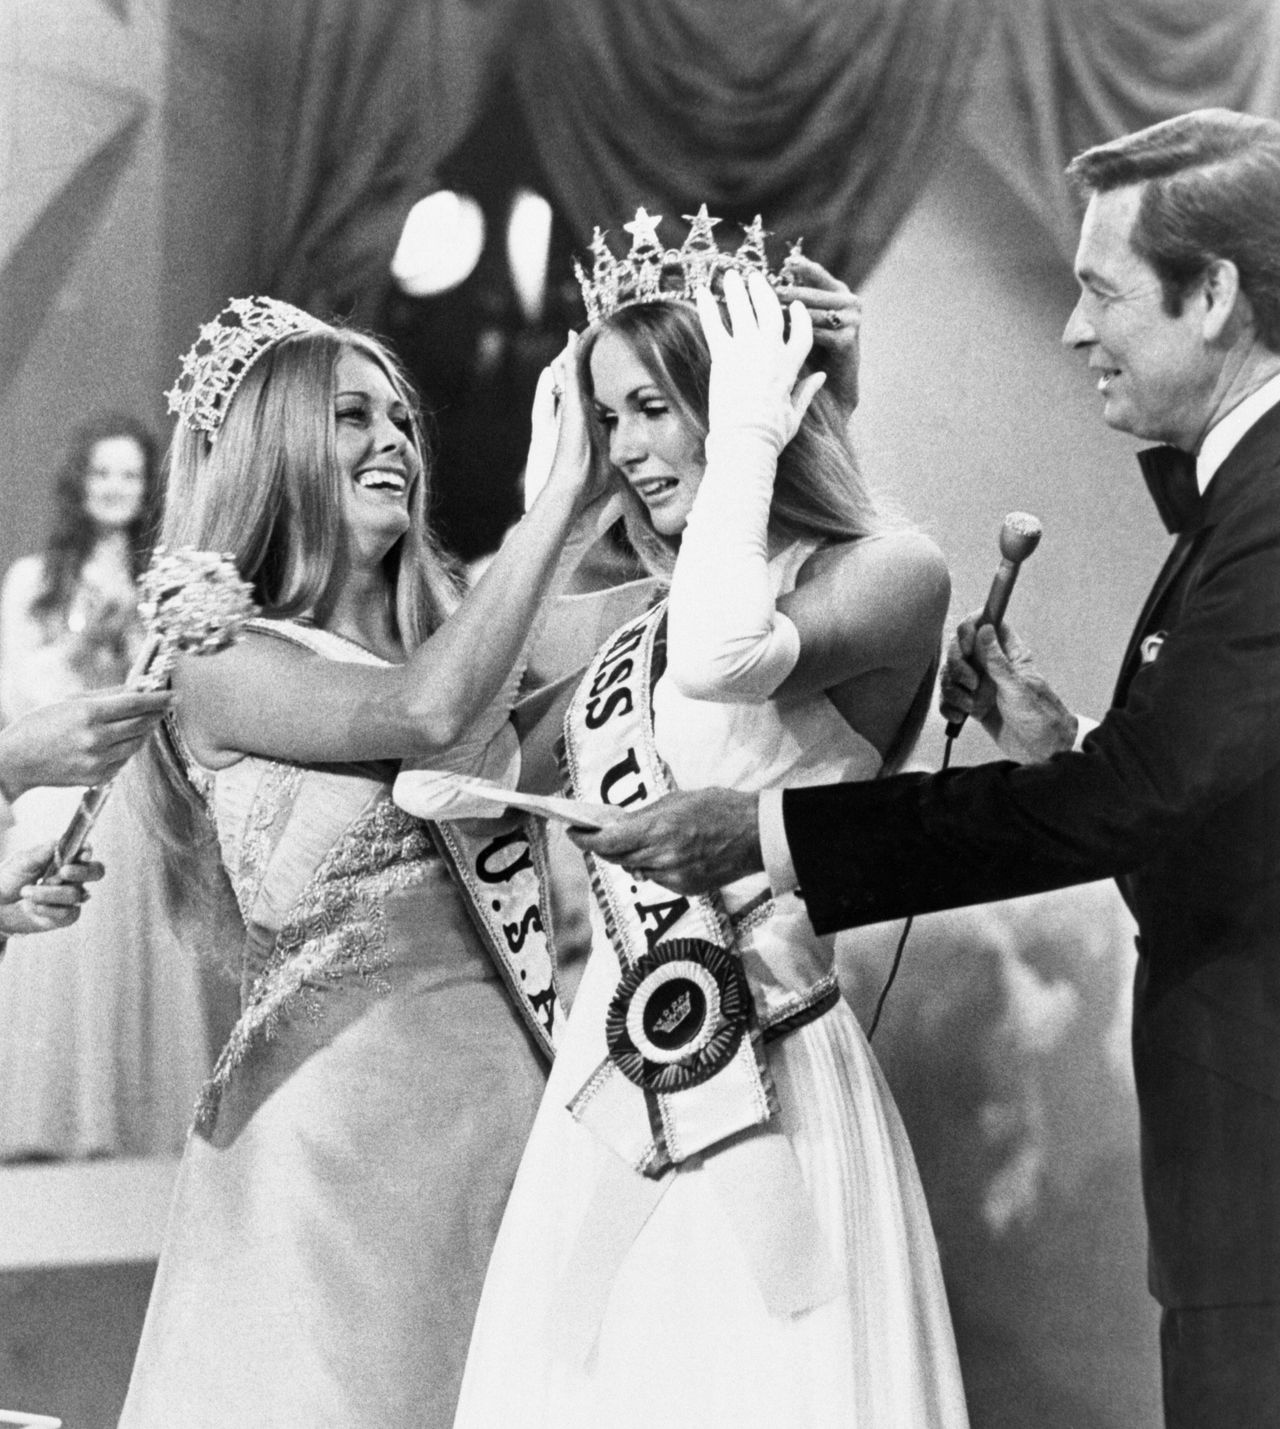 Hawaii's Tanya Wilson is crowned Miss USA of 1972 by Pennsylvania's Michele McDonald, Miss USA of 1971, as Barker emcees.